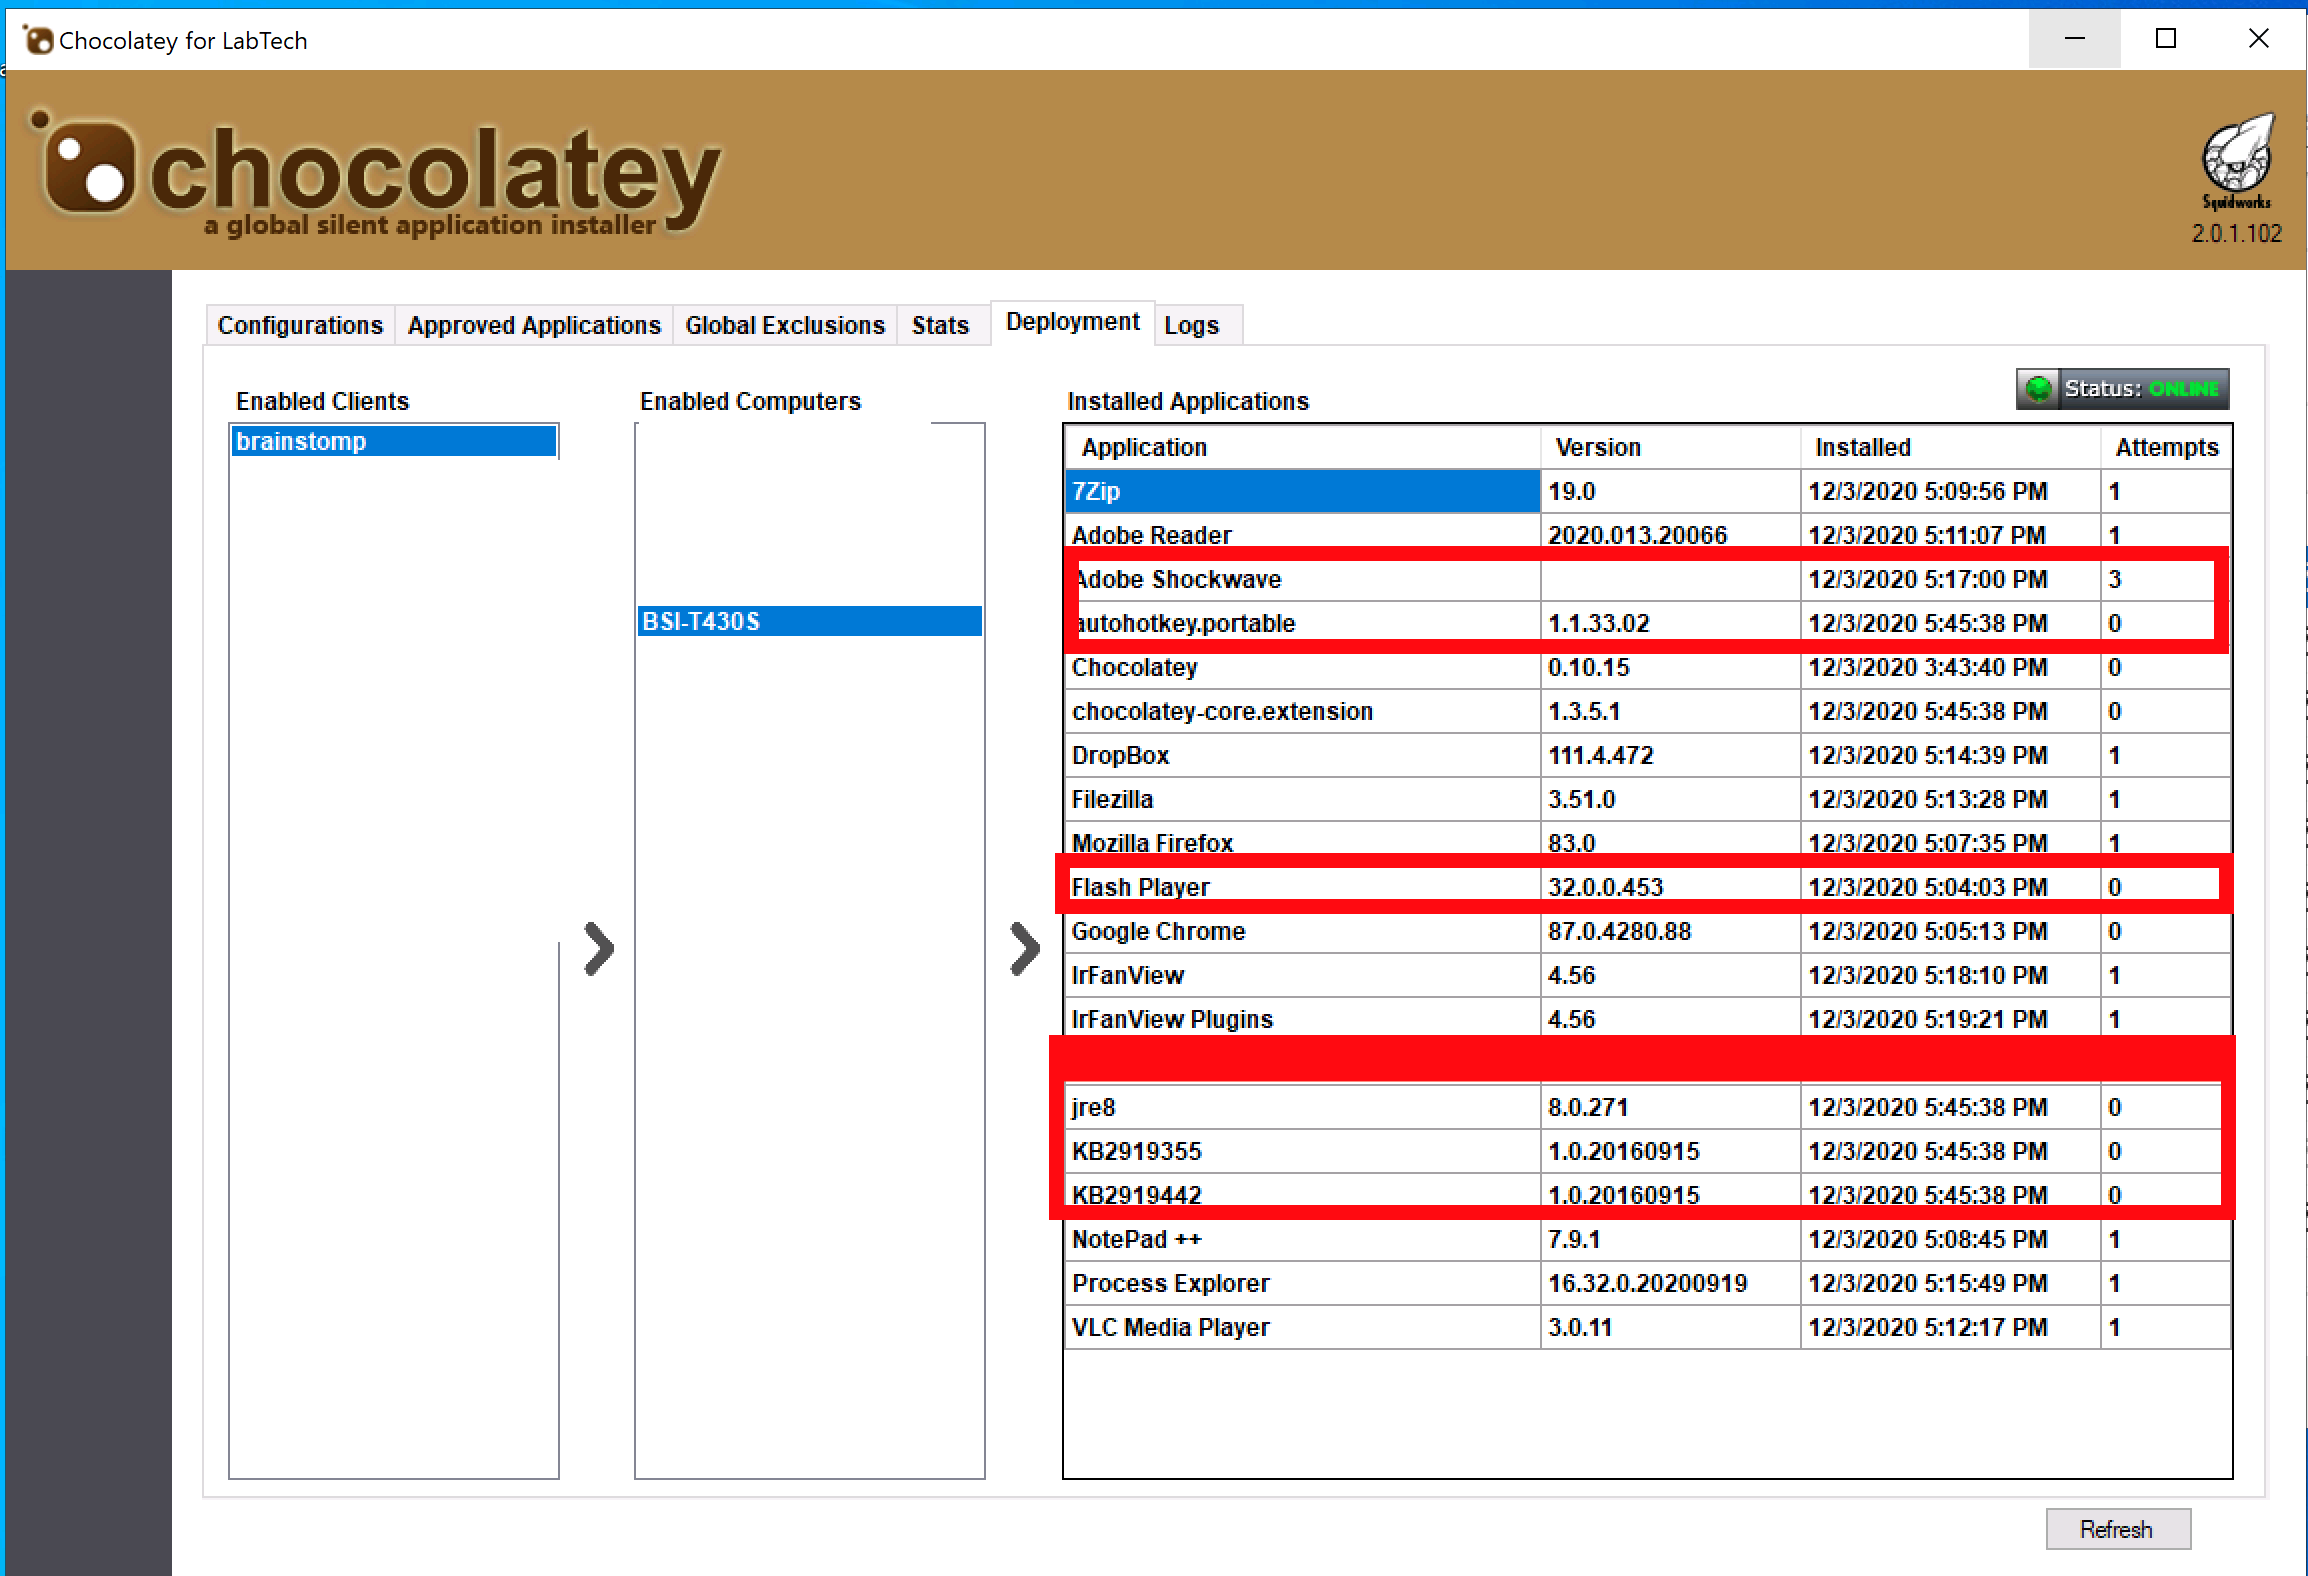 Chocolatey Main Screen showing stuff deployed to test system. Everything in red was initially setup as No Auto Install